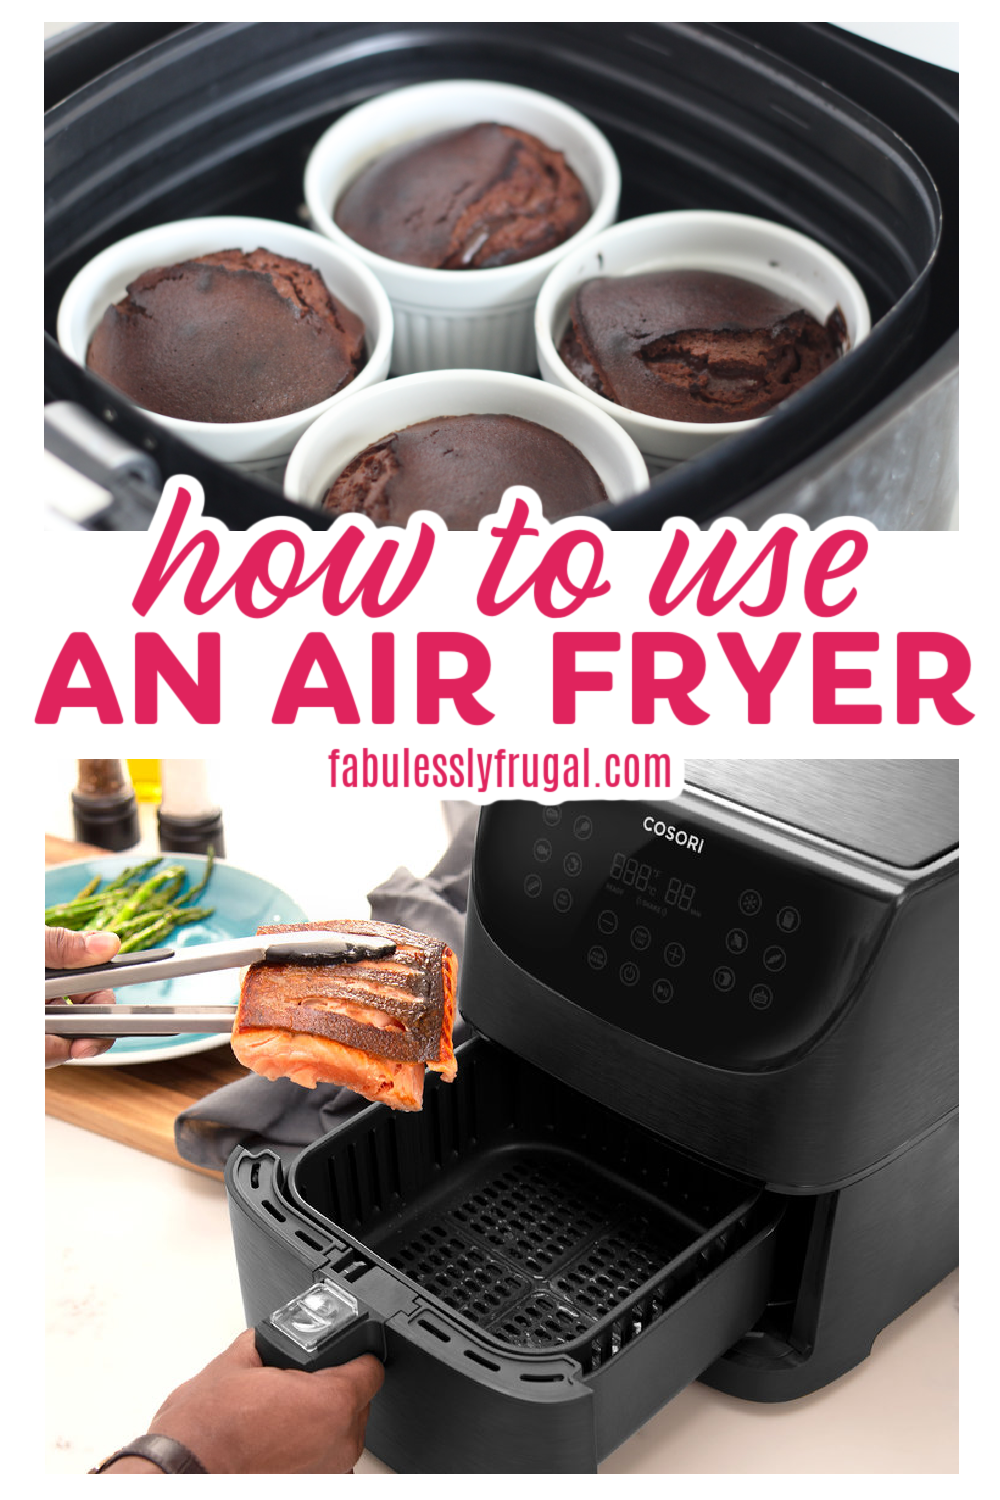 Should You Use Parchment Paper In the Air Fryer? Recipe - Fabulessly Frugal